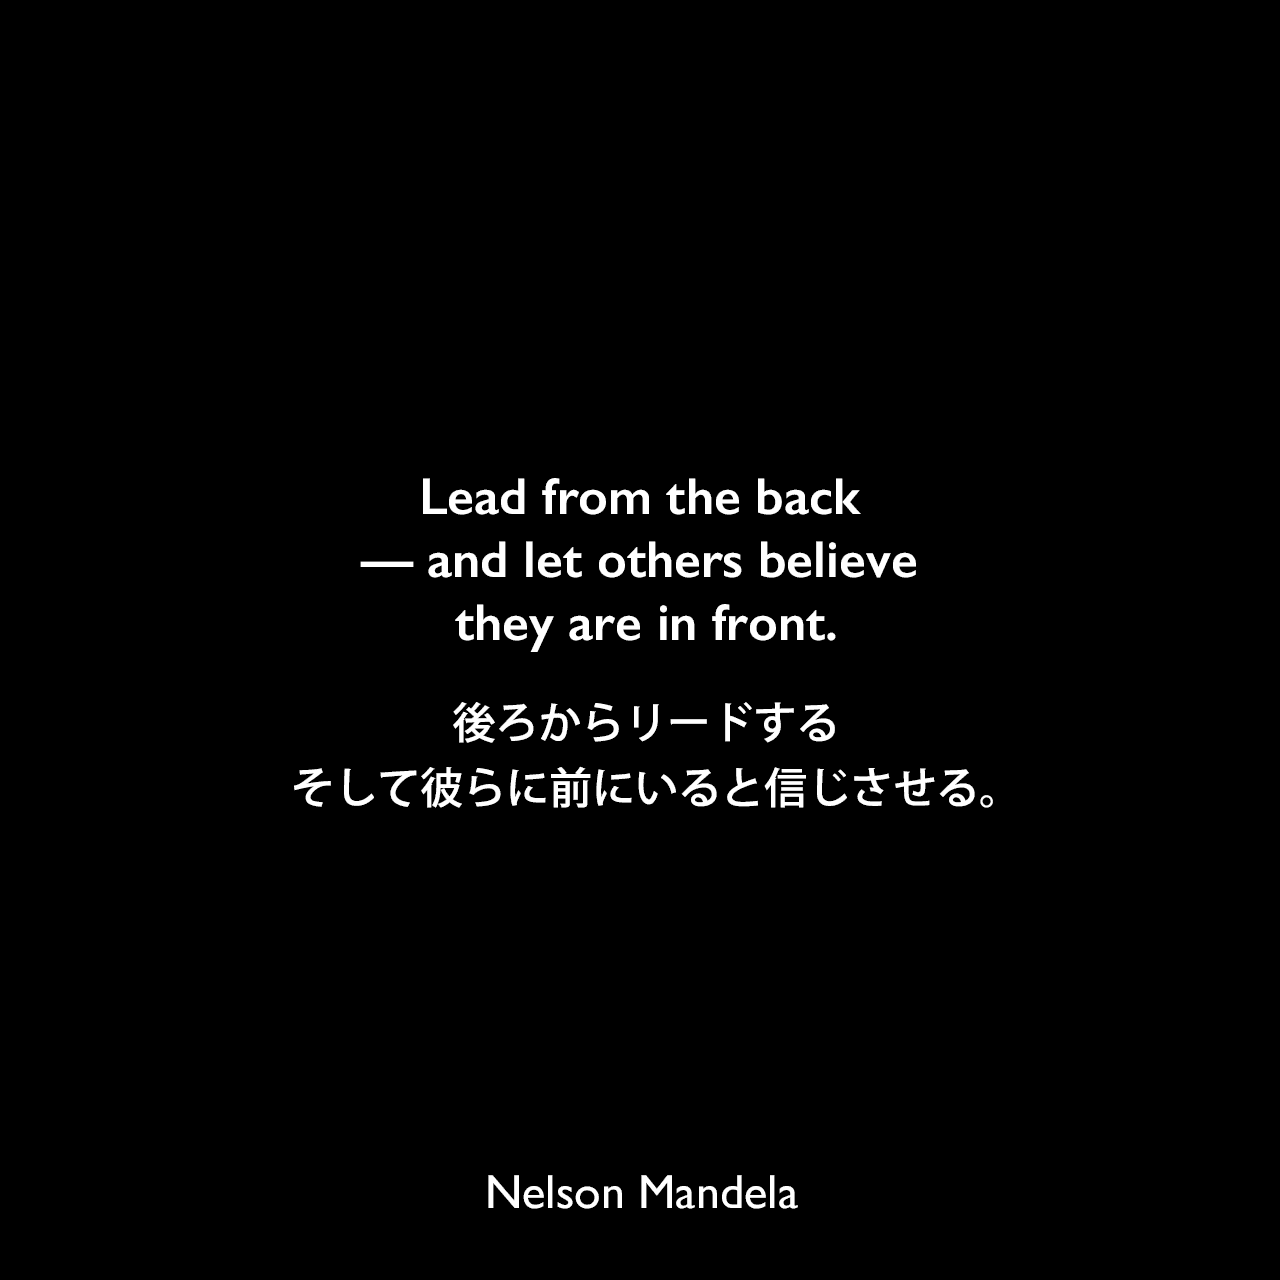 Lead from the back — and let others believe they are in front.後ろからリードする、そして彼らに前にいると信じさせる。Nelson Mandela